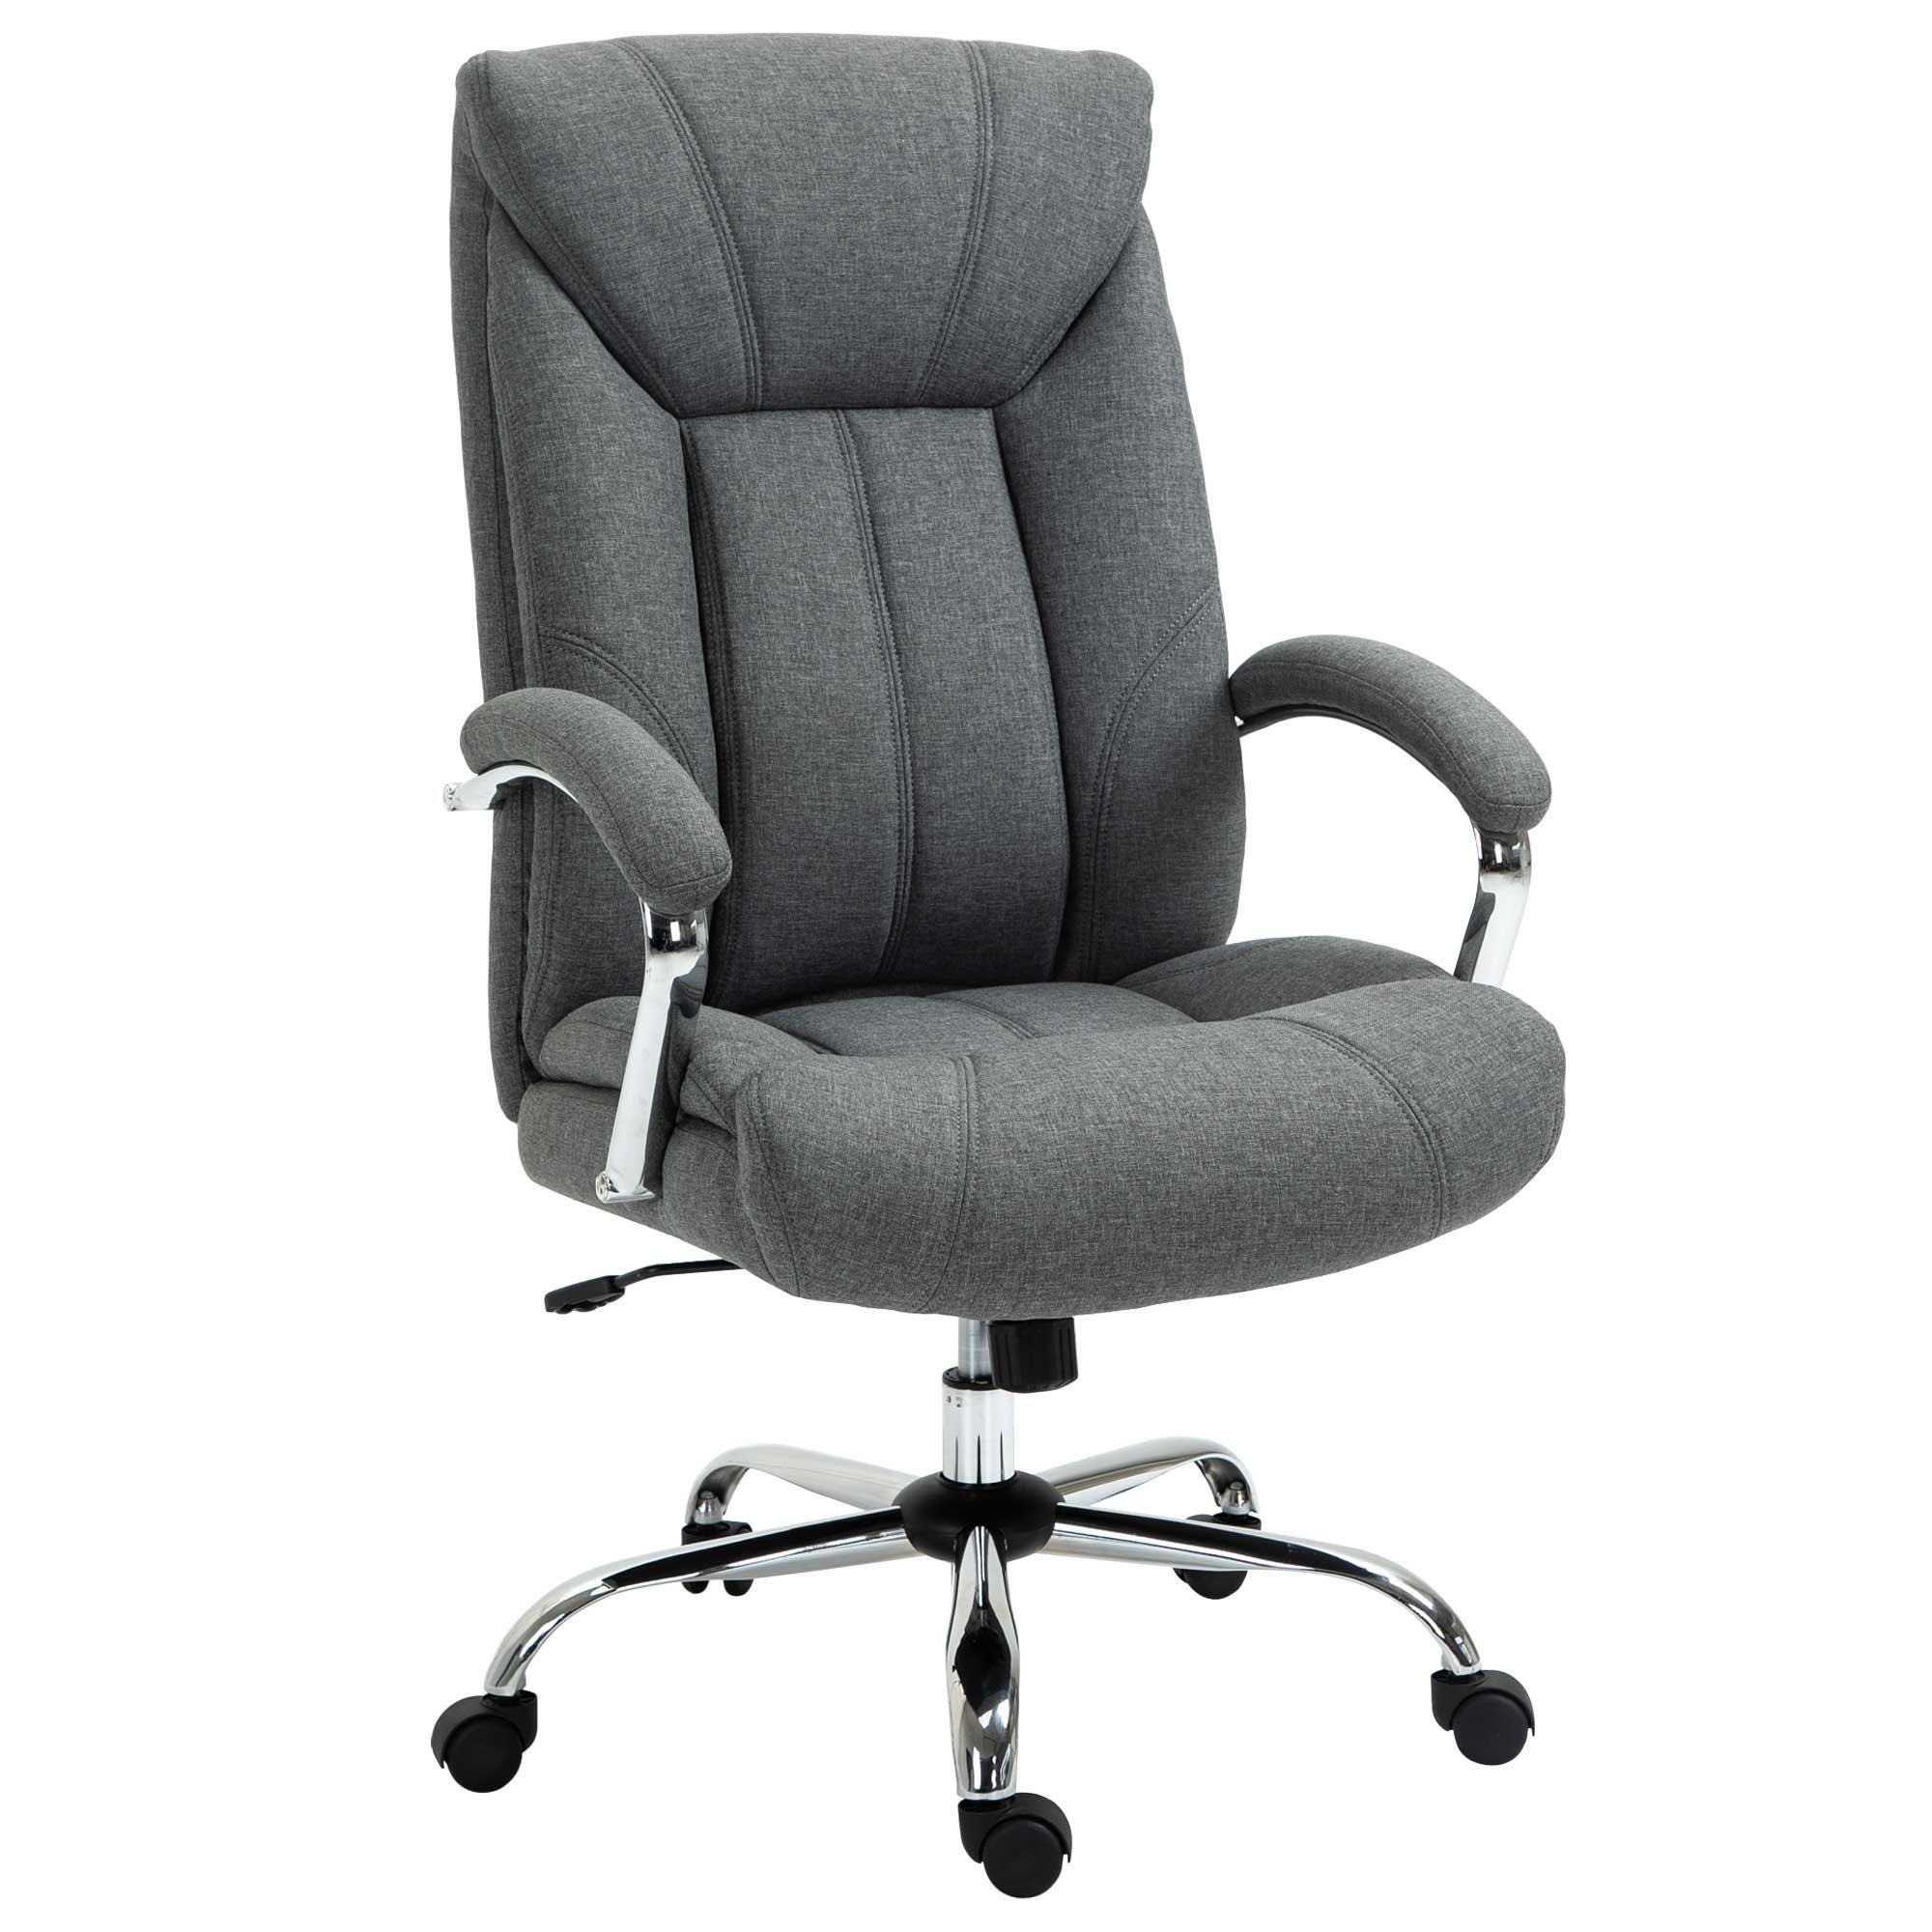 High Back Home Office Chair Computer Desk Chair with Arm, Swivel Wheels - image 1